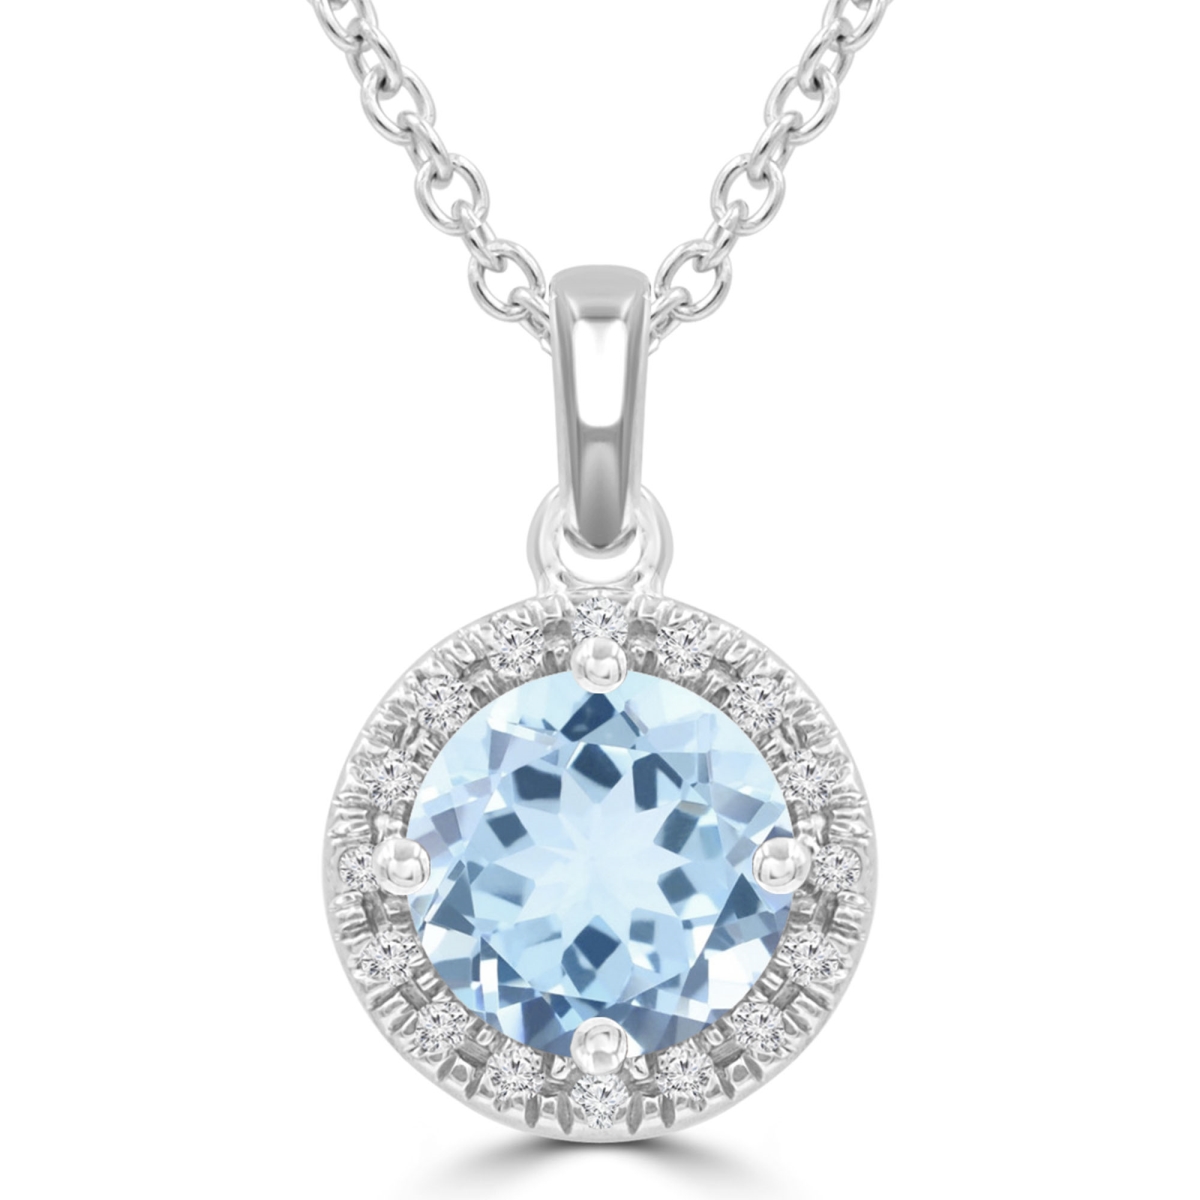 Picture of Majesty Diamonds MDR220191 1.1 CTW Round Blue Topaz Halo Pendant Necklace in 14K White Gold